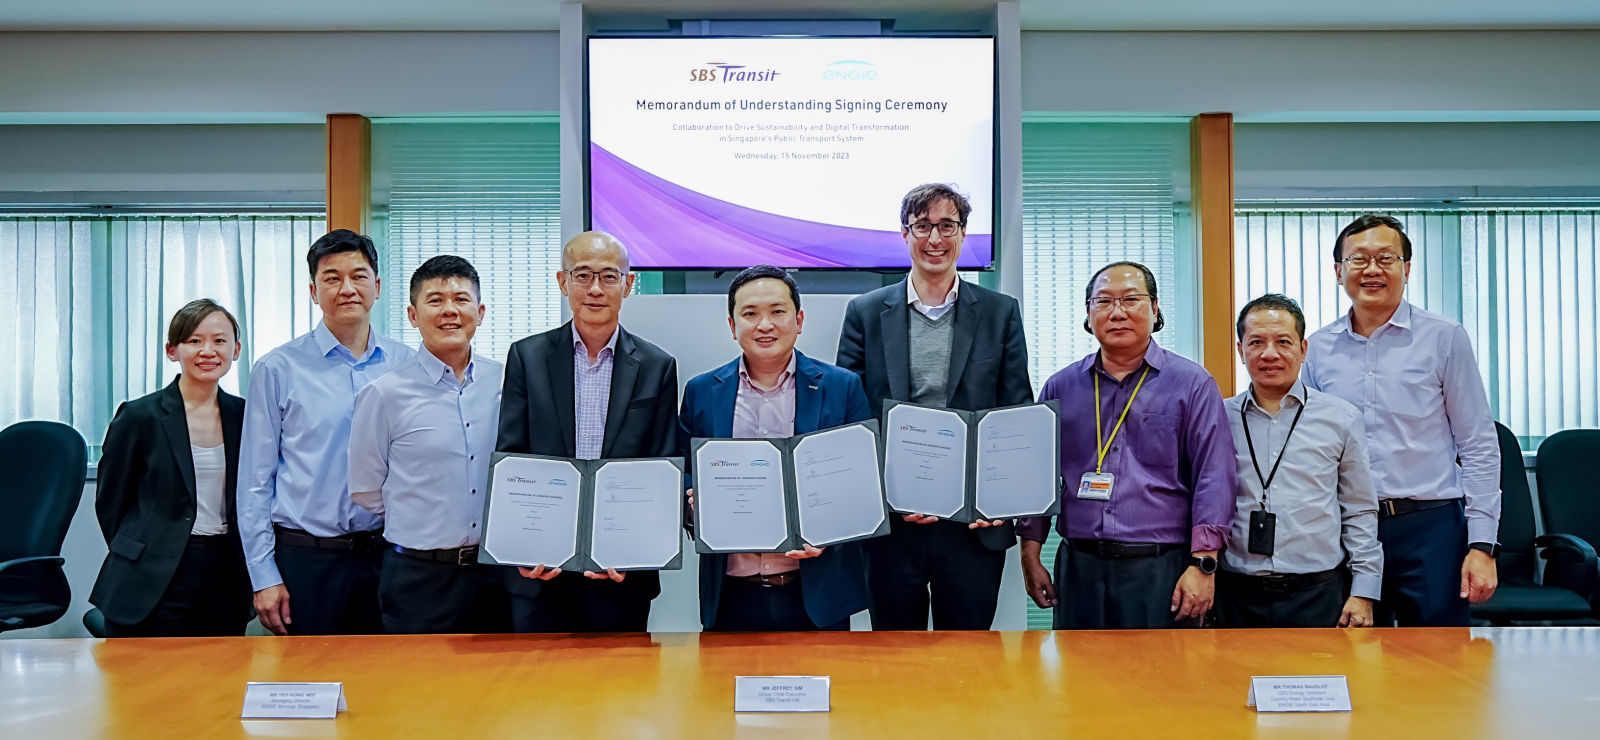 Mr YEO Kong Nee, Managing Director of ENGIE Services Singapore, Mr Jeffrey Sim, SBS Transit Group Chief Executive Officer, and Mr Thomas Baudlot, CEO of ENGIE South East Asia (pictured centre) with executive staff during MOU signing ceremony sealing SBS Transit and ENGIE’s partnership to drive sustanability and digital transformation in Singapore’s public transport system.